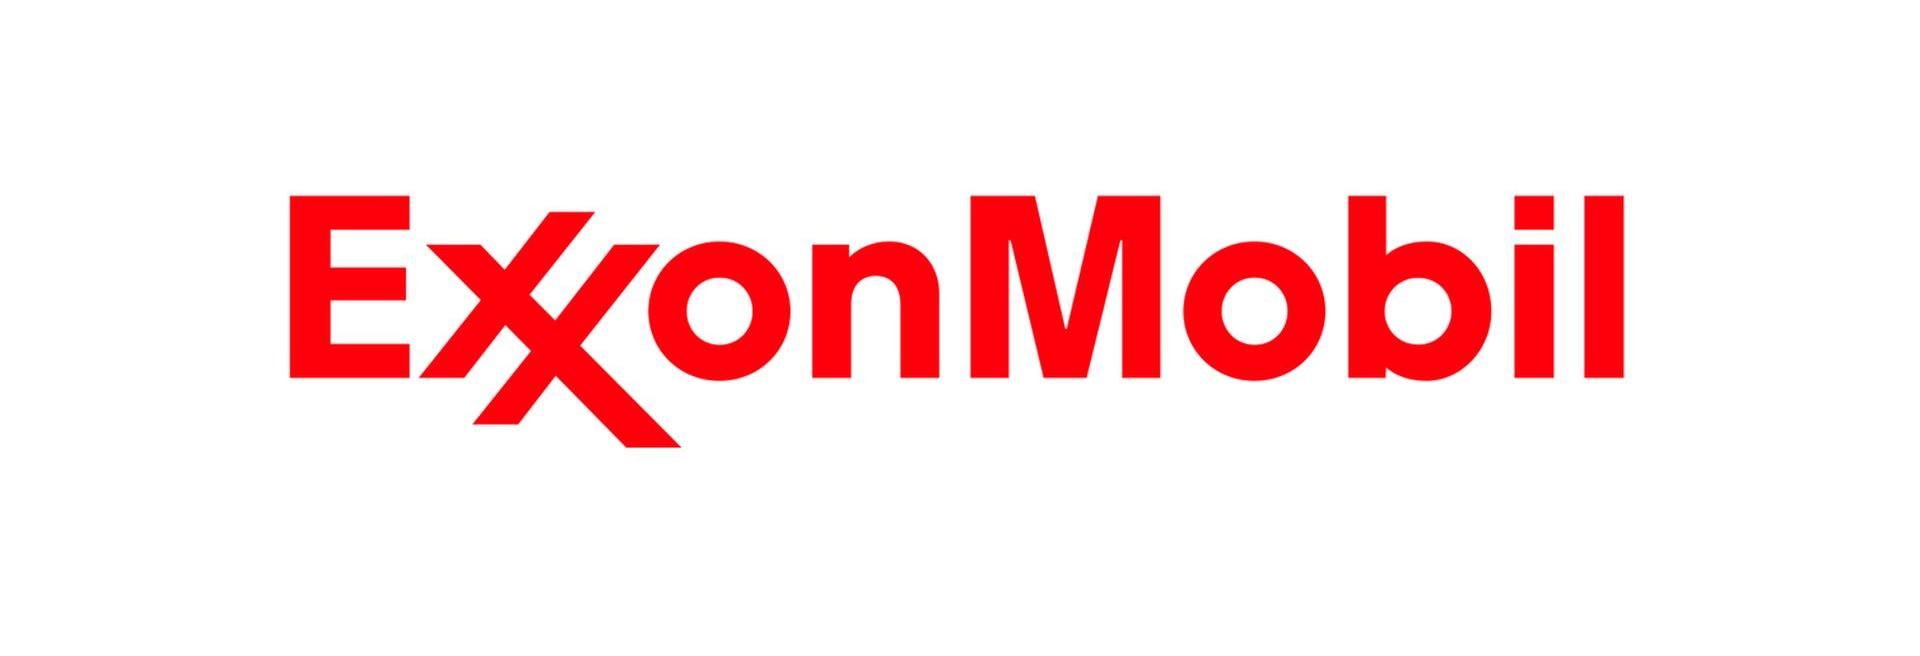 ExxonMobil Bets On Upskilling And Sustainability In New State-Of-The-Art Home